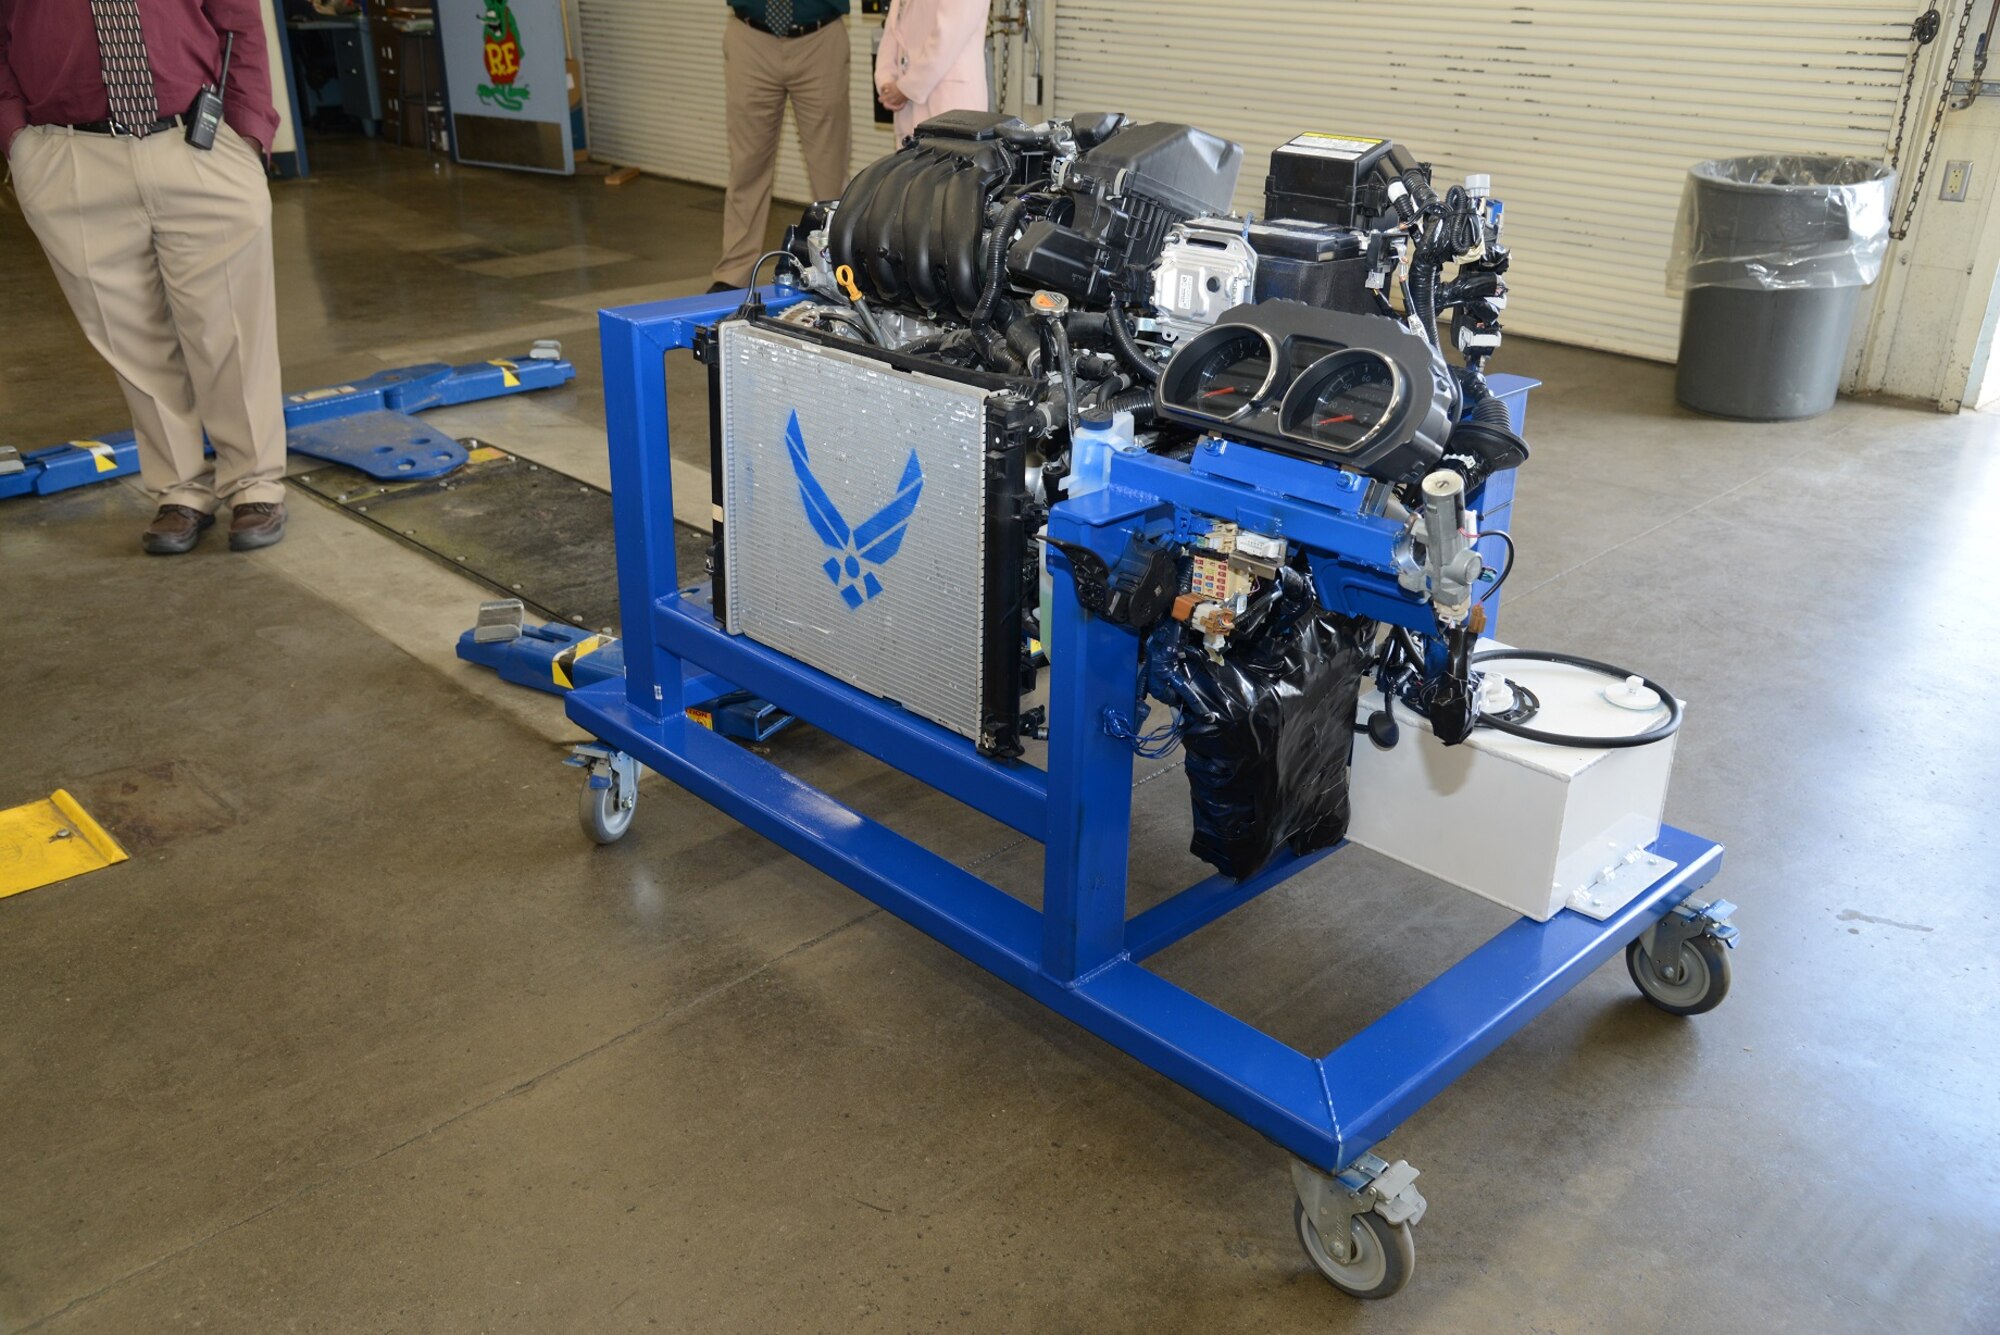 The Lancaster, California, Air Force recruiting office spearheaded the donation of a new 2018 Nissan Leaf engine, which was introduced during a small ceremony at the school May 21. (U.S. Air Force photo by Kenji Thuloweit)